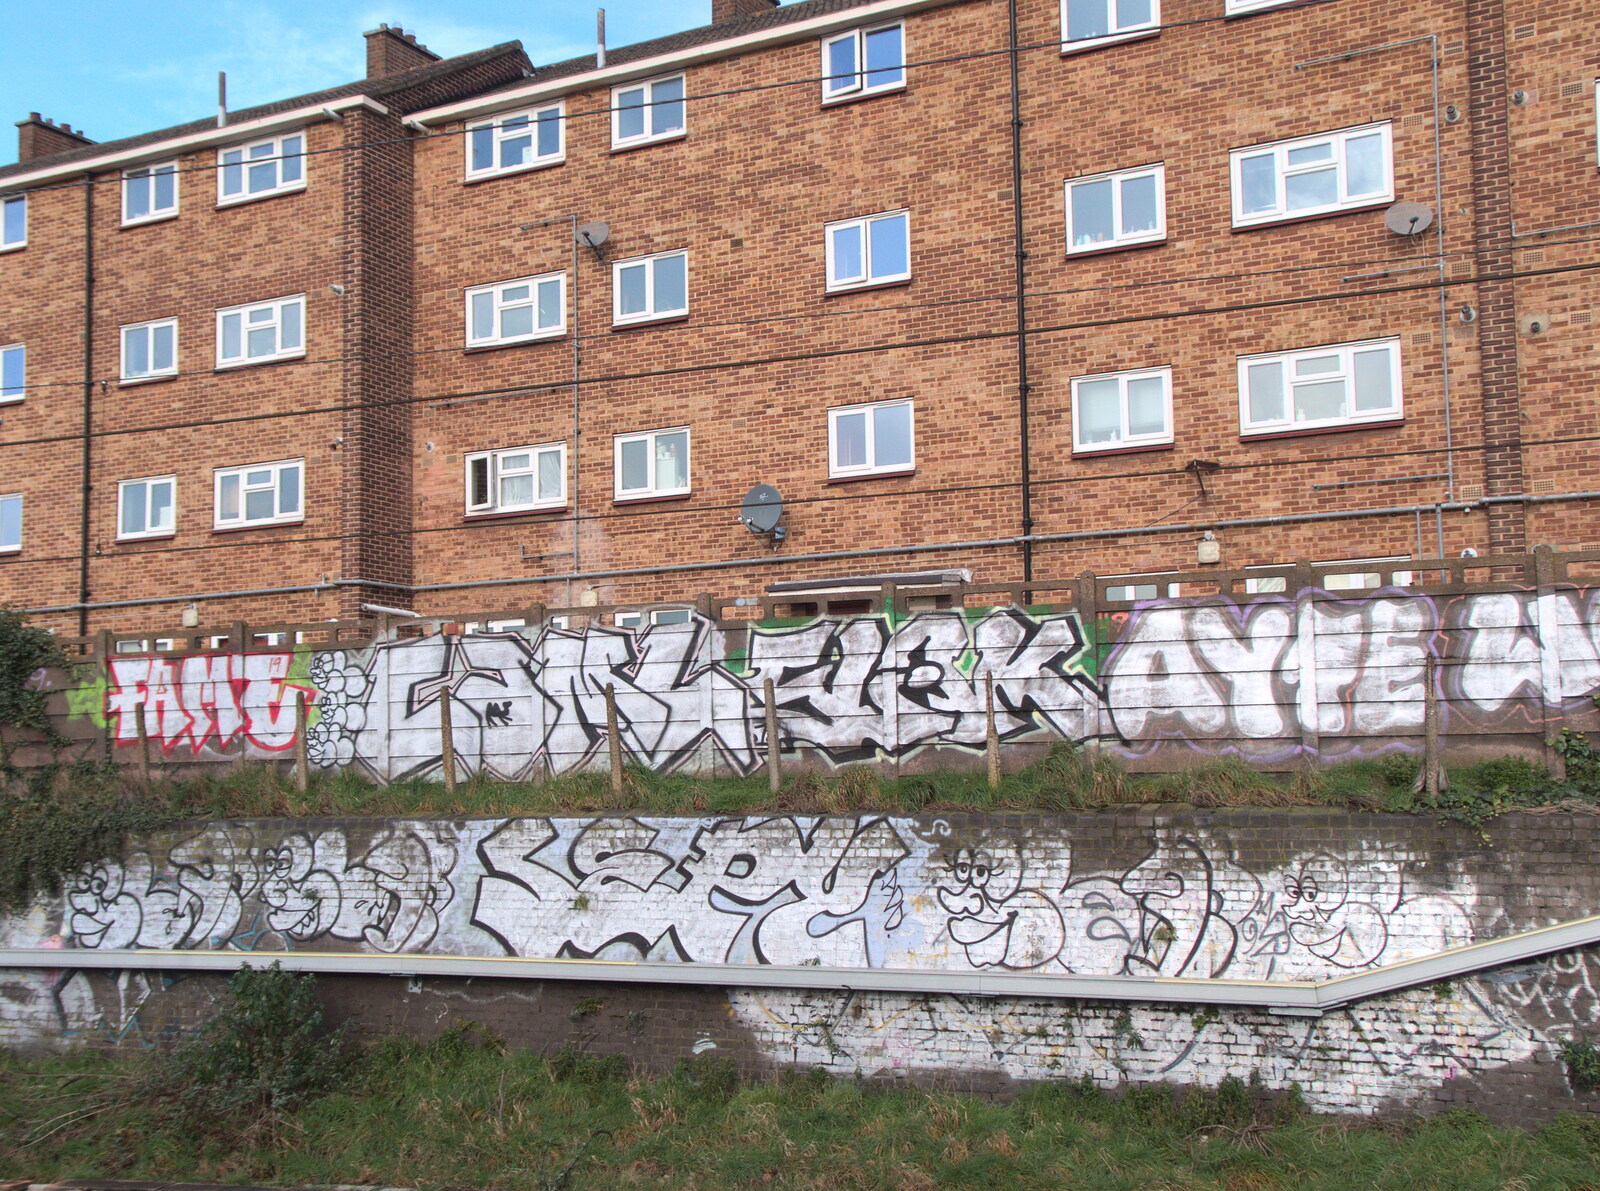 Broken-down Freight Trains, Manor Park, London - 28th January 2020: A mass of tags under a block of flats